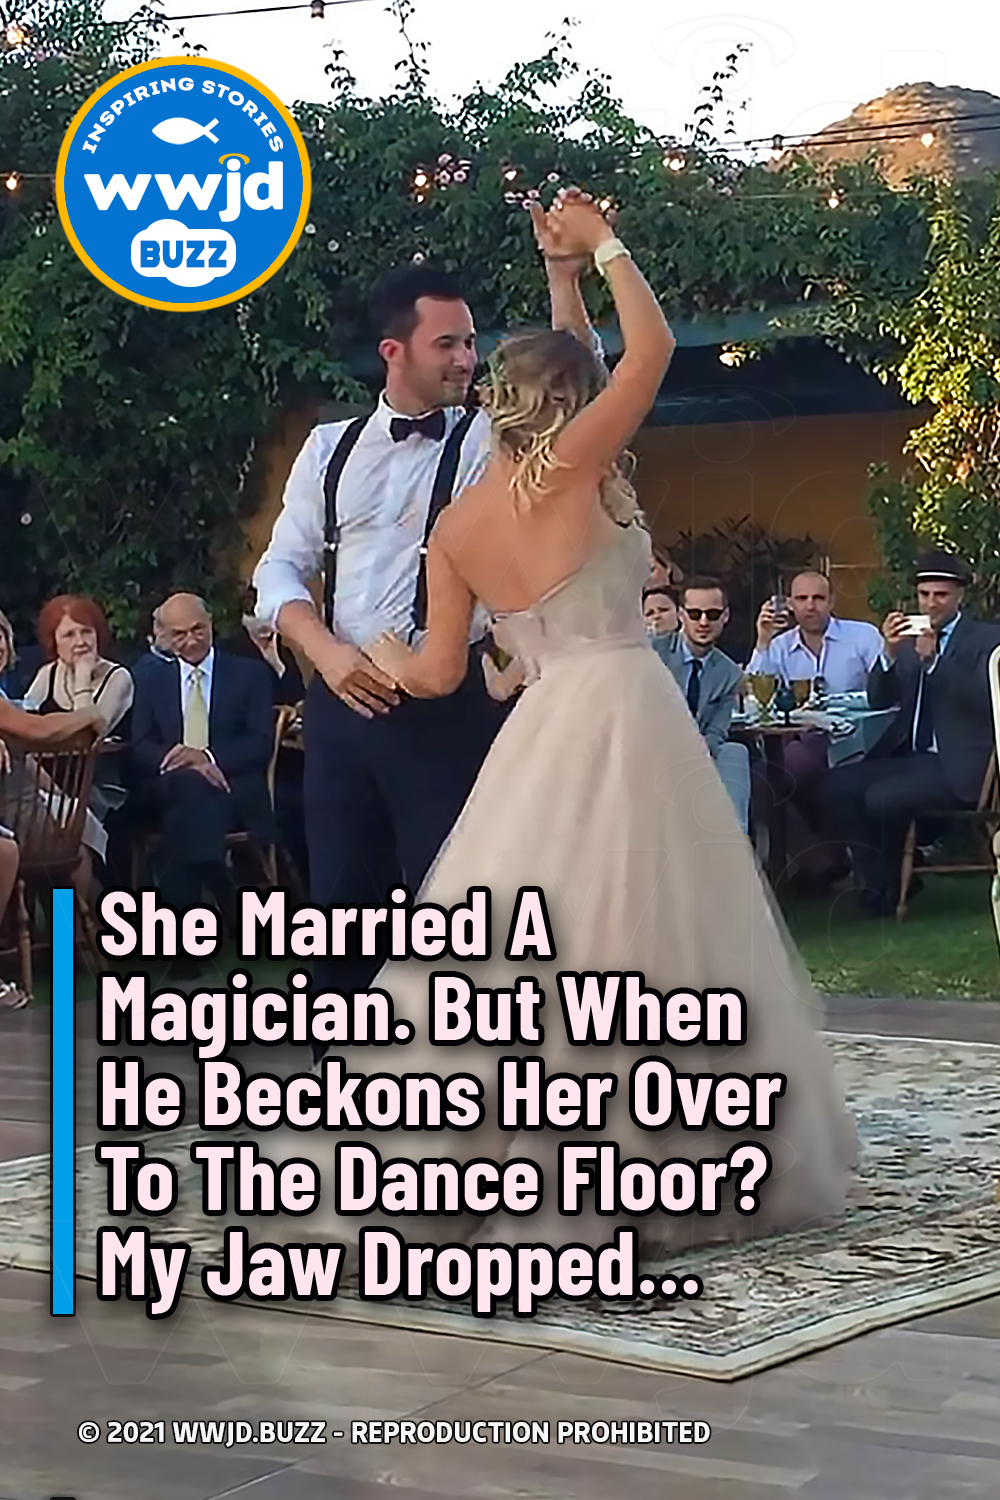 She Married A Magician. But When He Beckons Her Over To The Dance Floor? My Jaw Dropped...